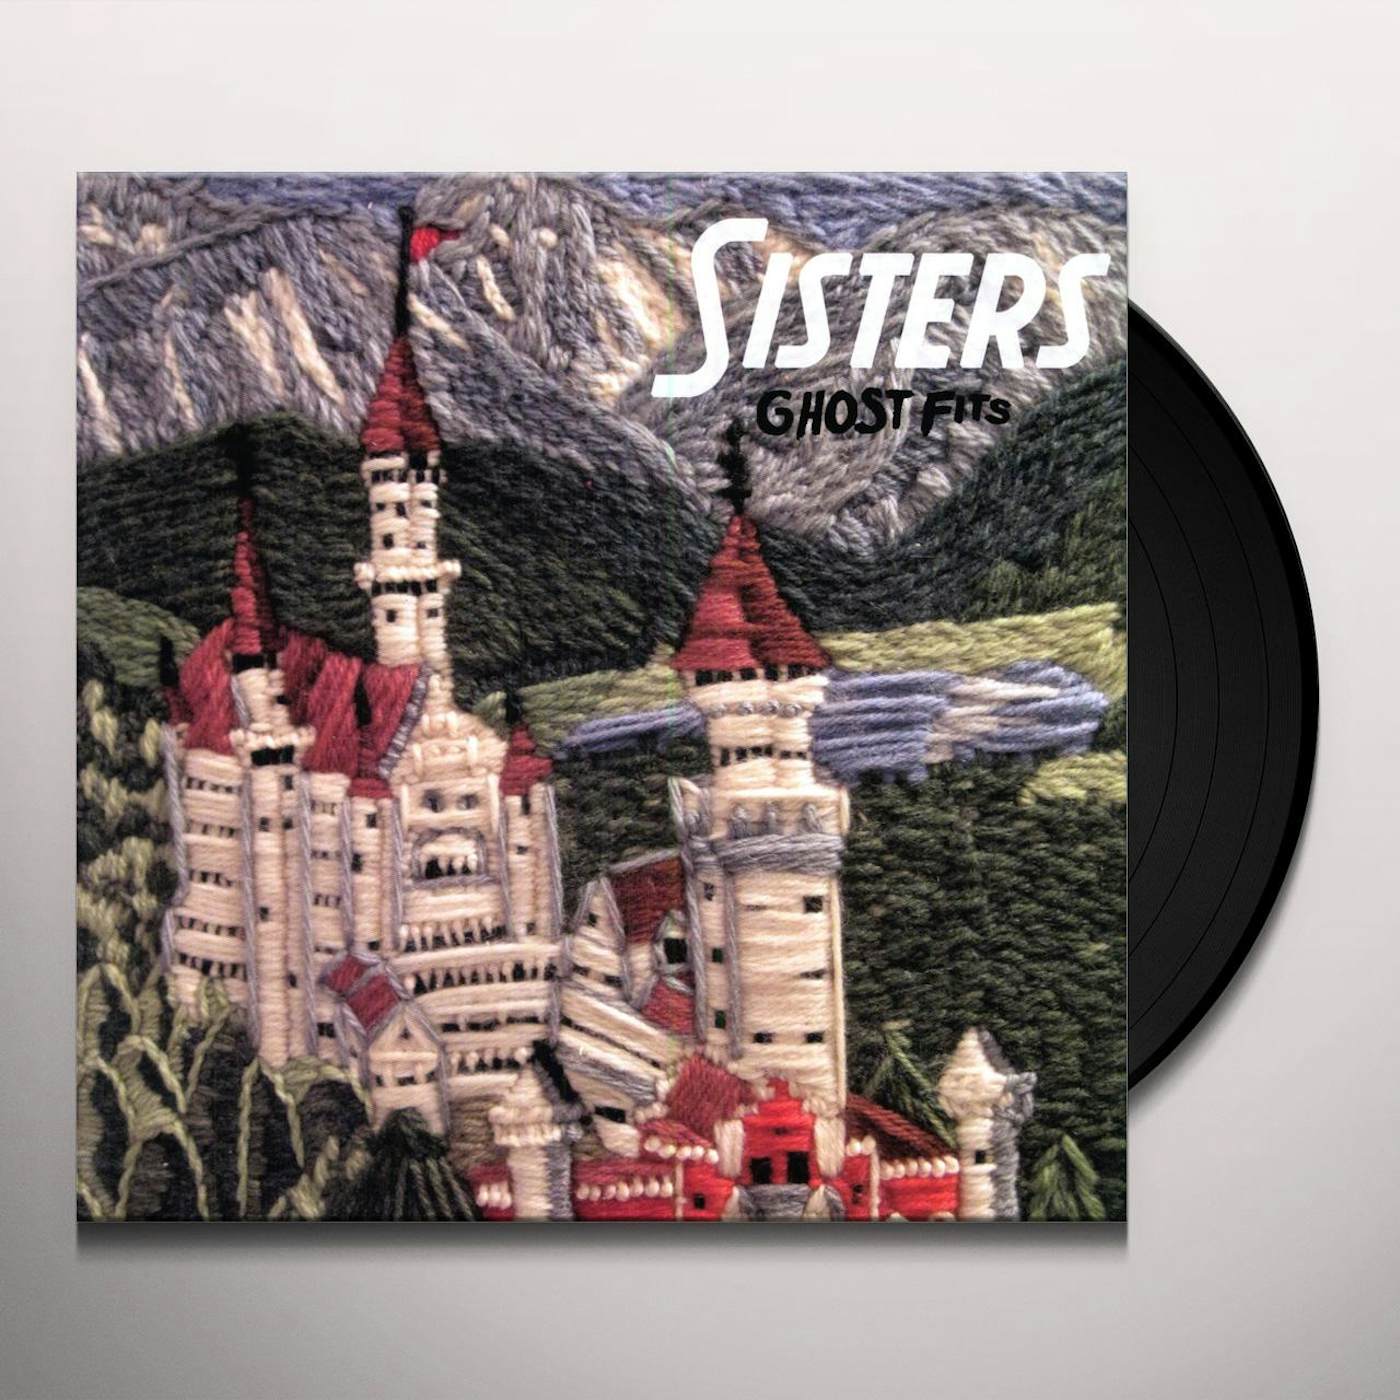 Sisters GHOST FITS Vinyl Record